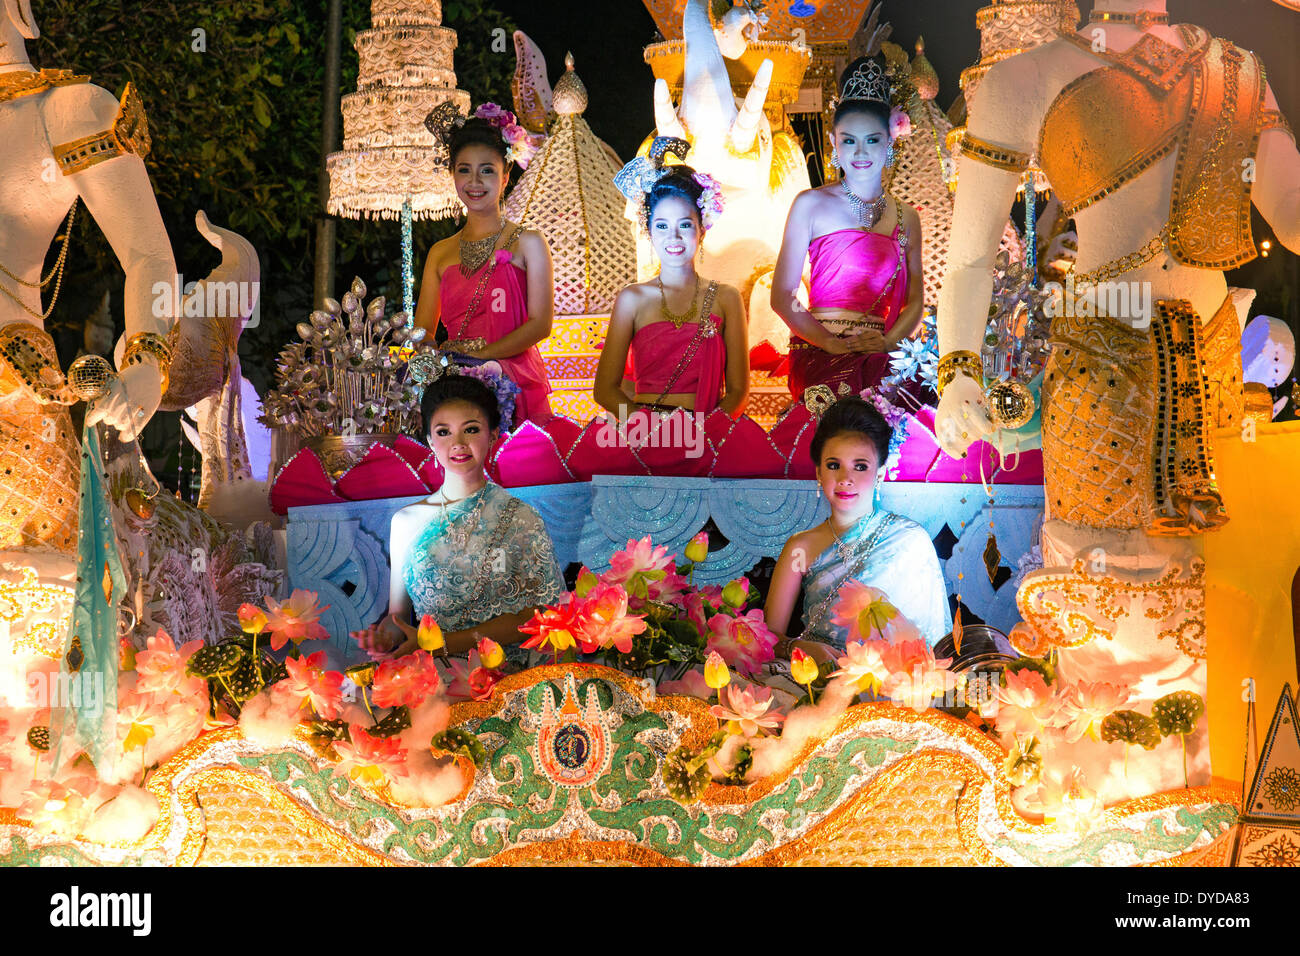 Women in traditional costume travelling on a float, parade, Loi Krathong Festival of Lights, Loy, Chiang Mai, Northern Thailand Stock Photo